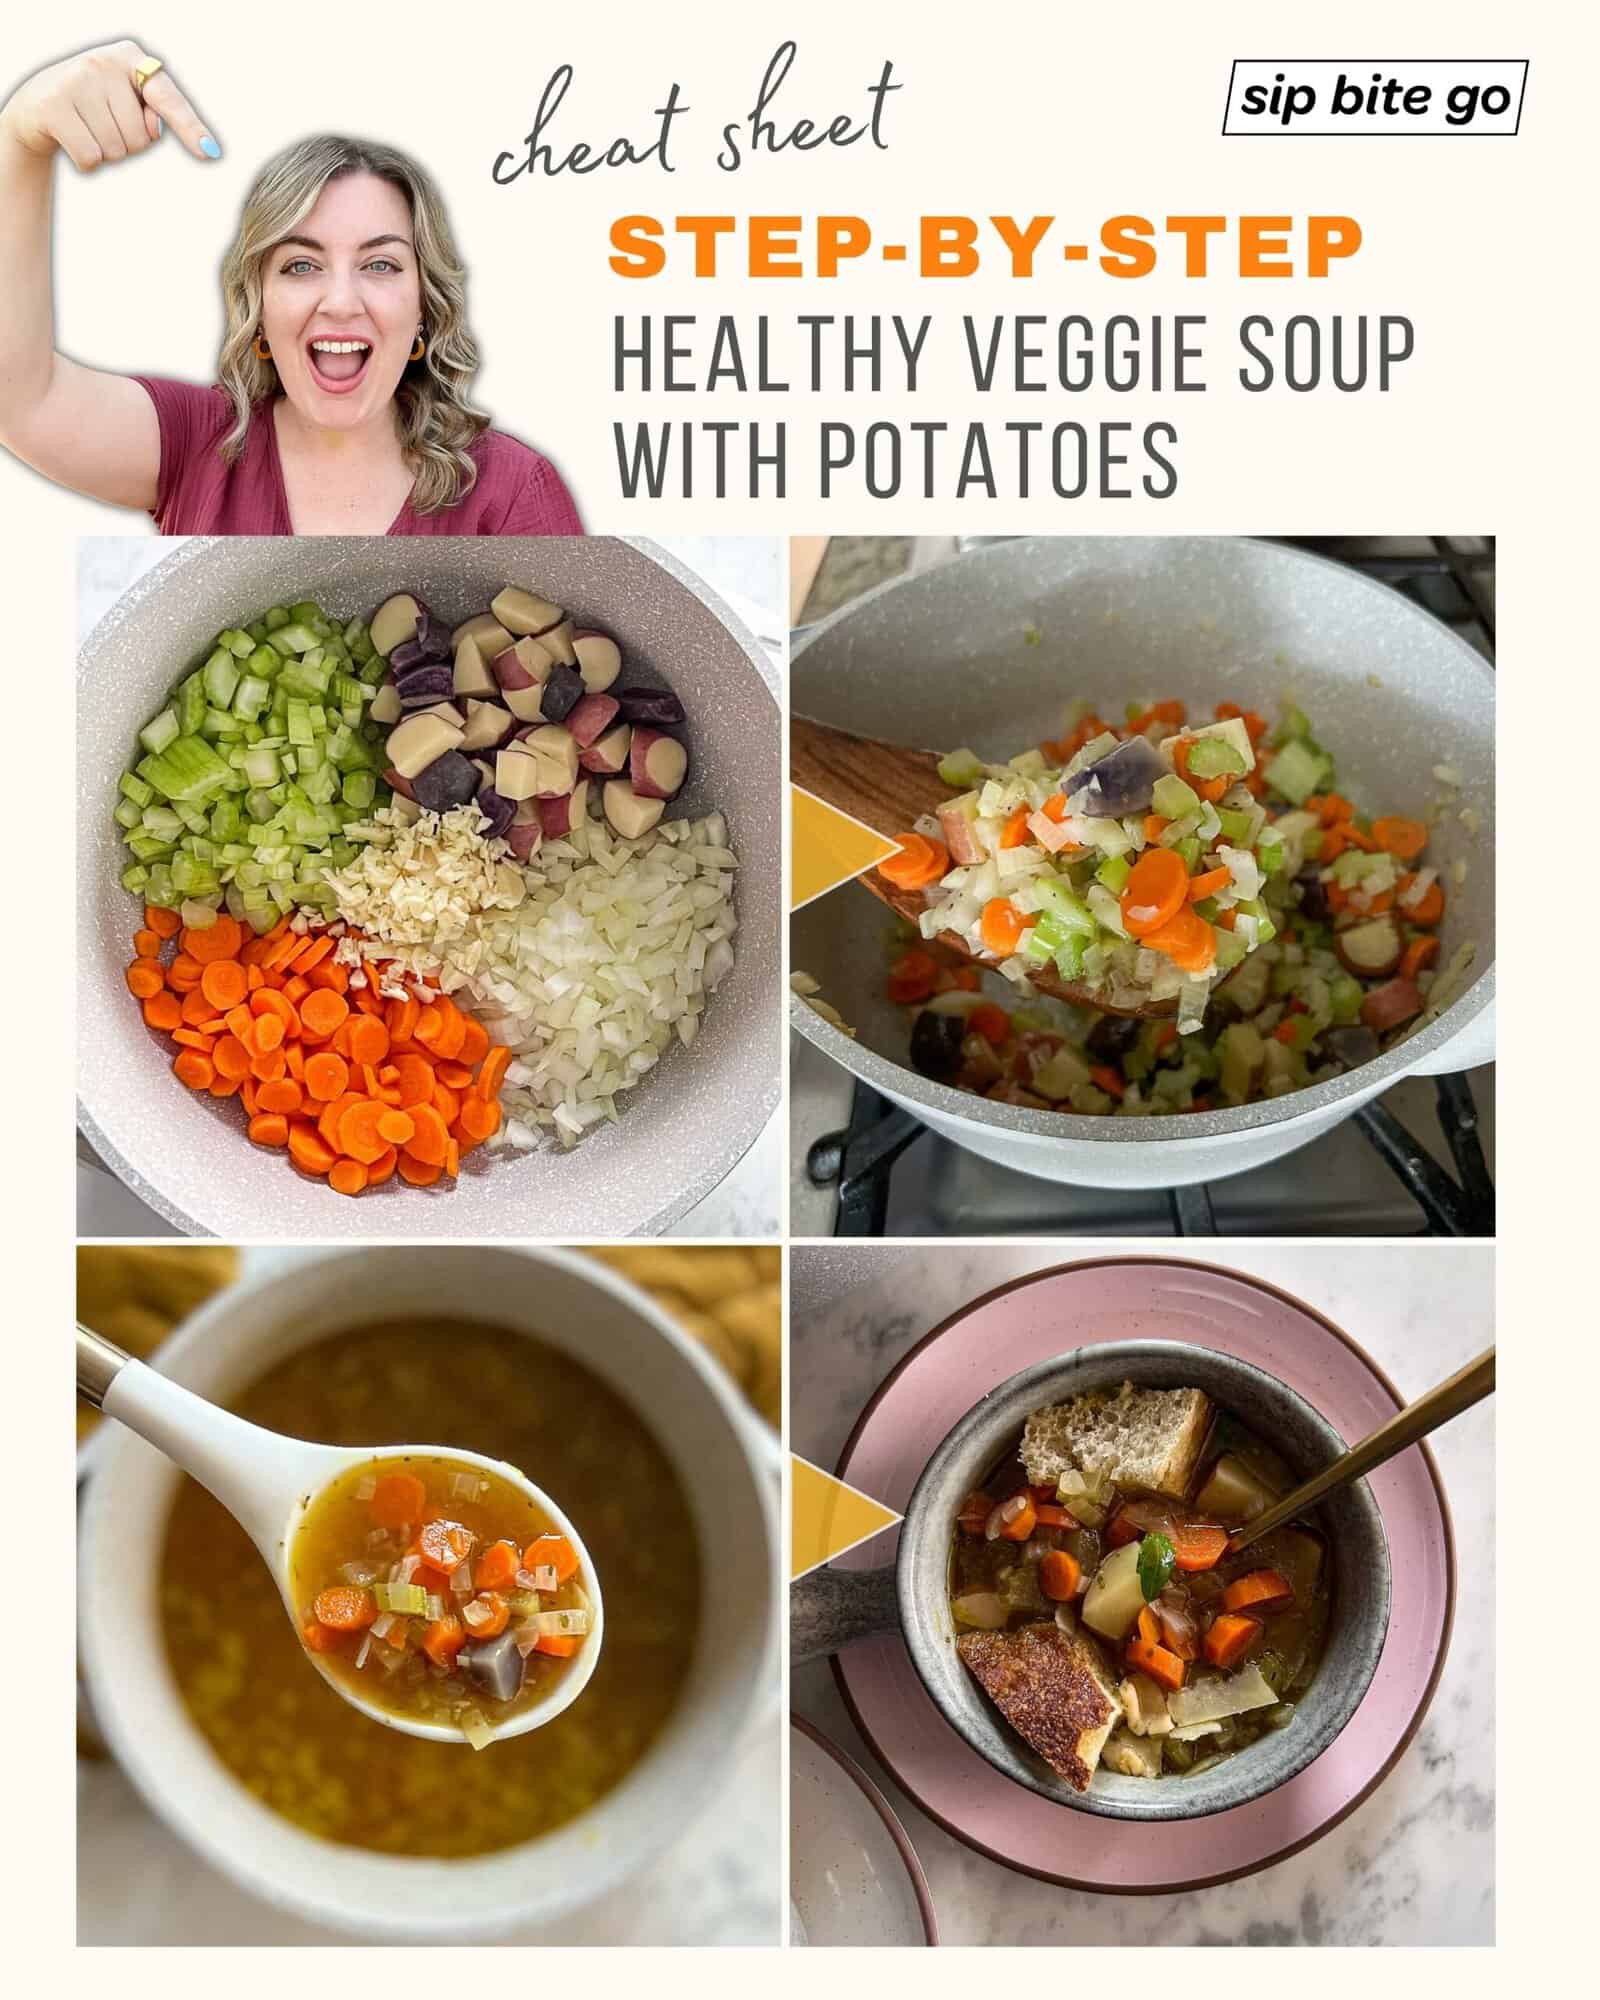 Infographic with step by step recipe depicting how to make vegetable soup with potatoes with Jenna Passaro and Sip Bite Go logo